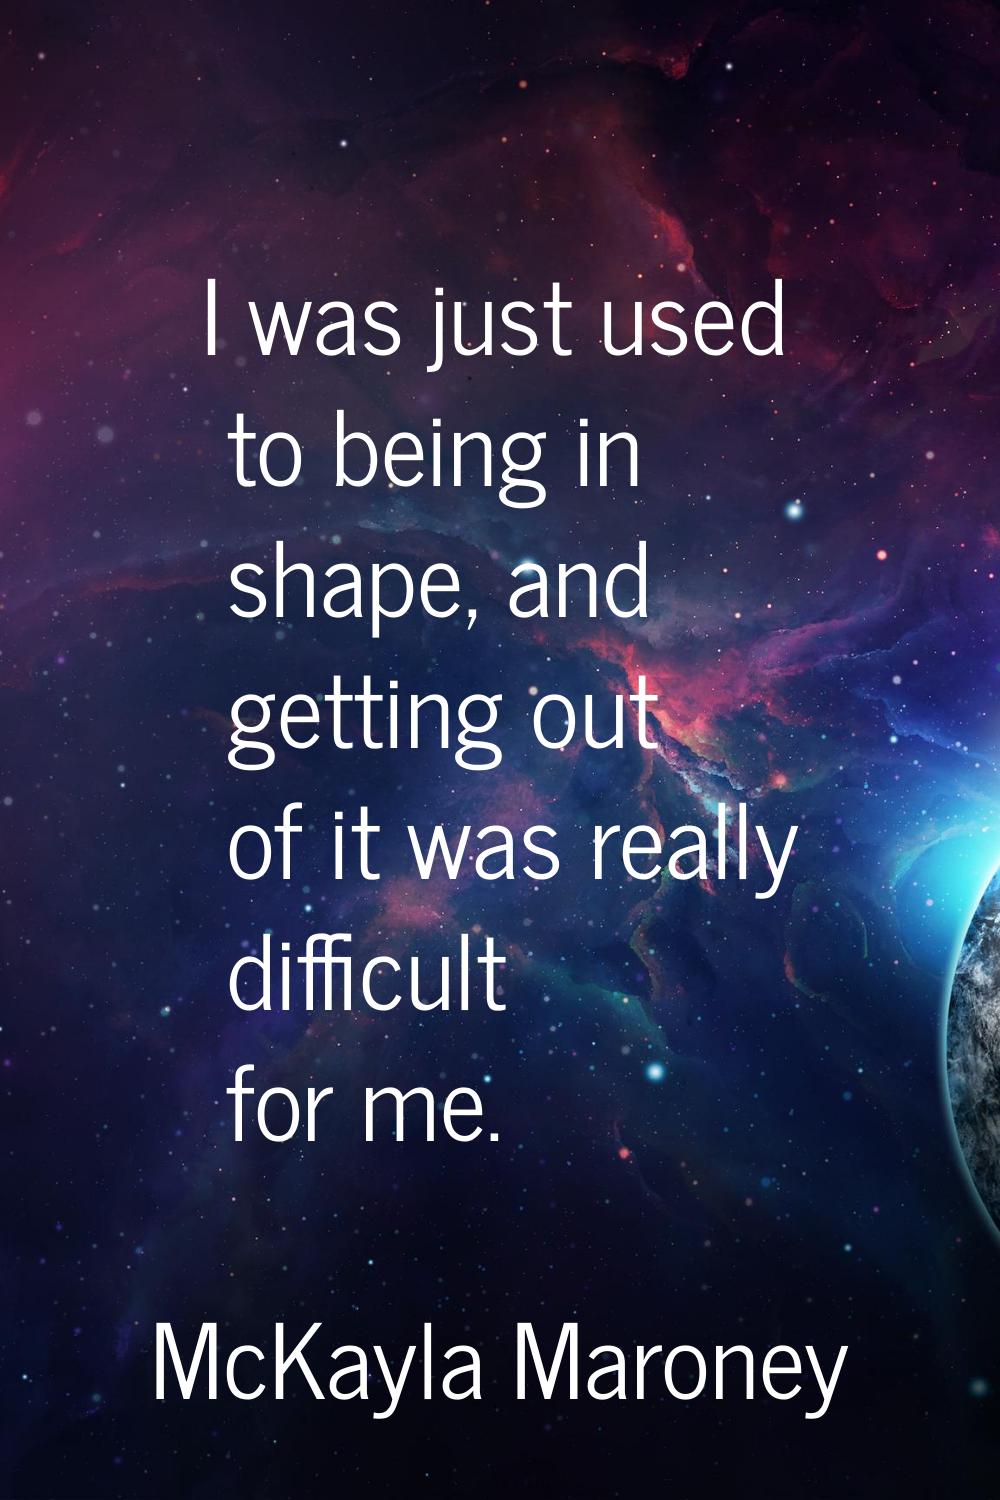 I was just used to being in shape, and getting out of it was really difficult for me.